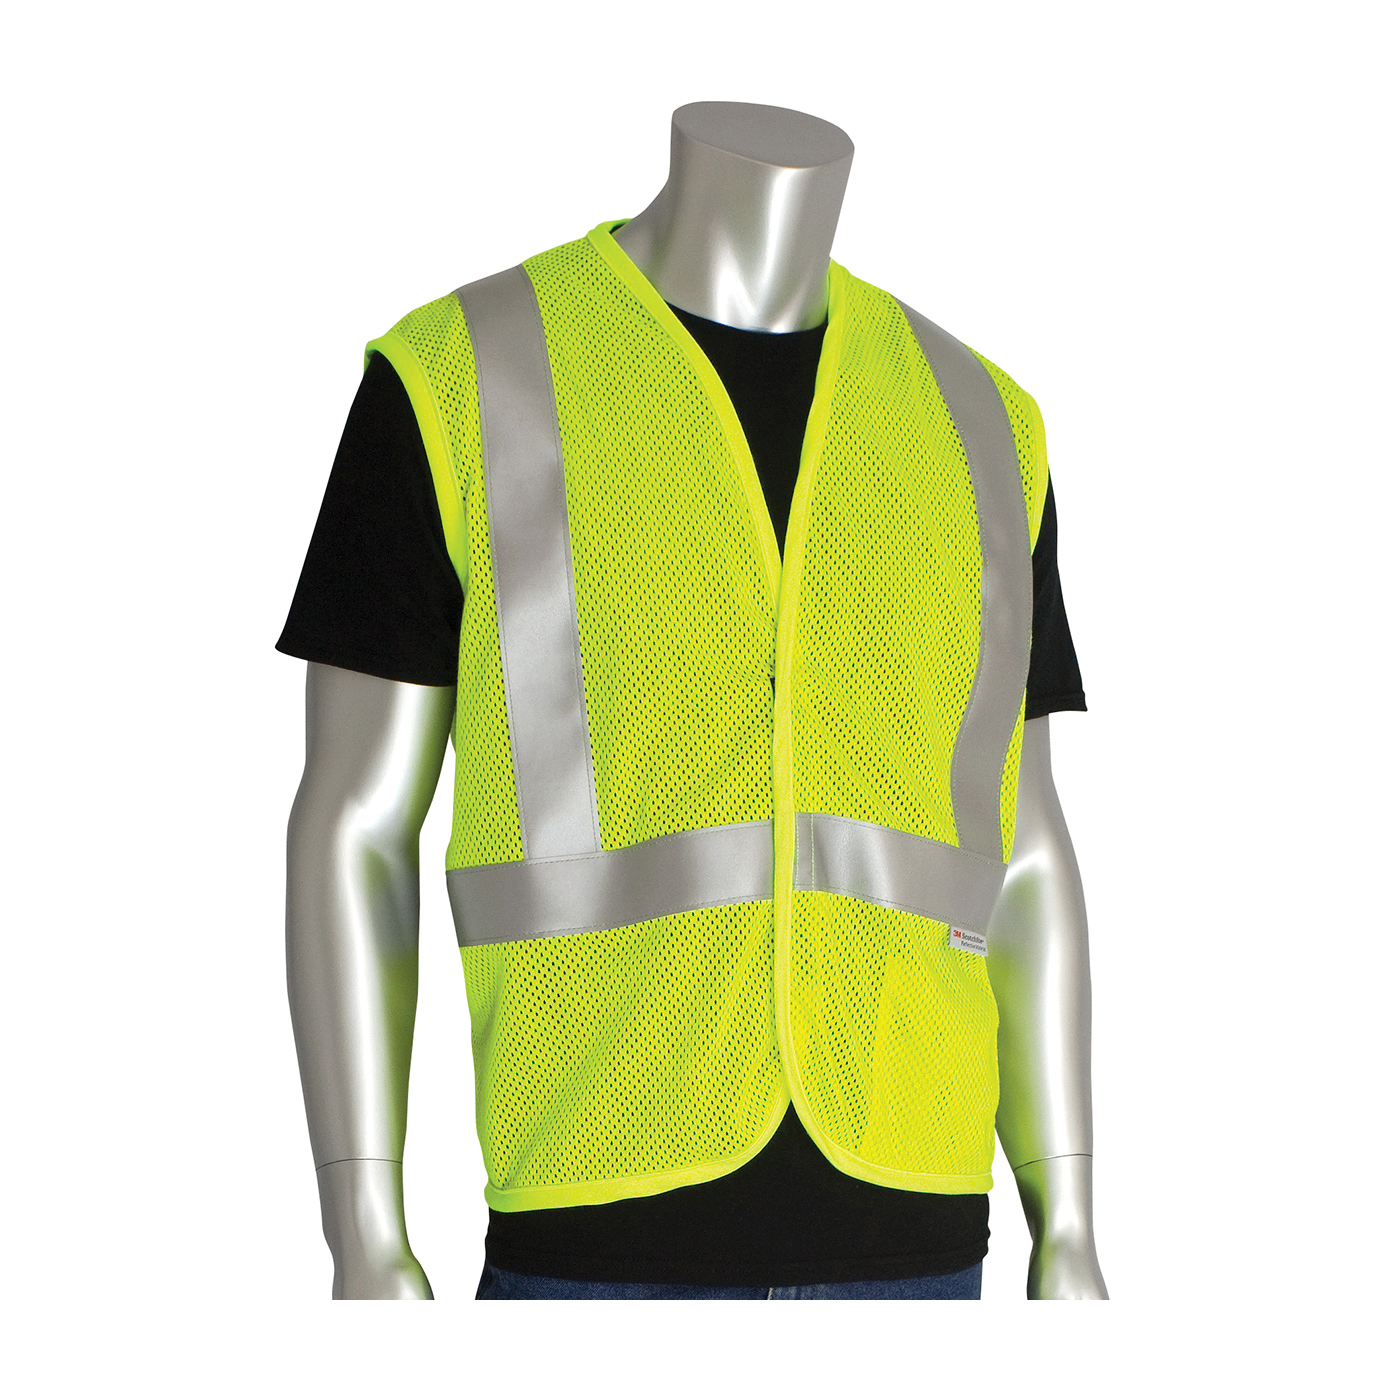 PIP® 305-2100-M Arc and Flame Resistant Vest, M, Hi-Viz Lime Yellow, Solid GlenGuard® Modacrylic/Aramid Blend Mesh Fabric, Hook and Loop Closure, 1 Pockets, ANSI Class: Class 2, Specifications Met: ANSI 107 Type R